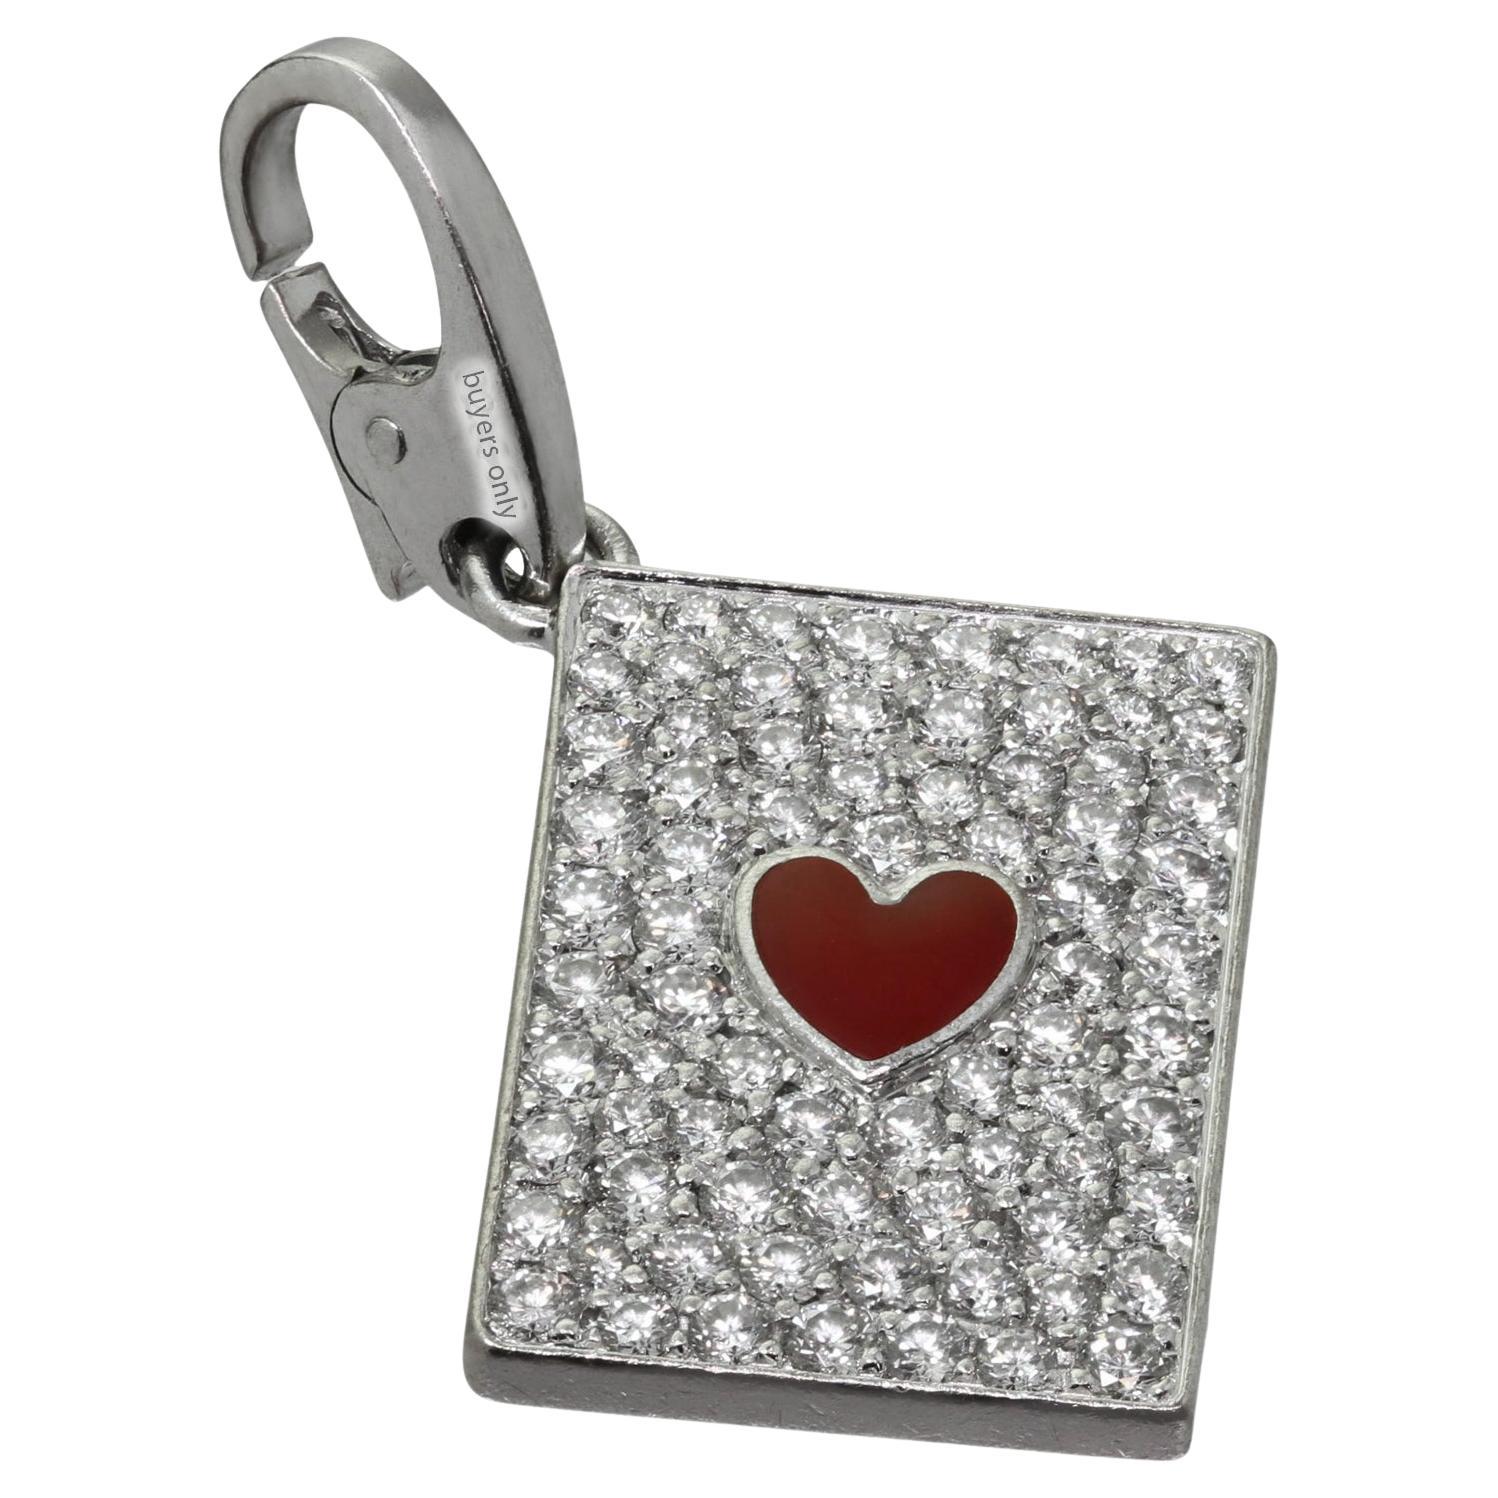 Cartier Diamond Ace of Hearts Card White Gold Limited Edition Pendant